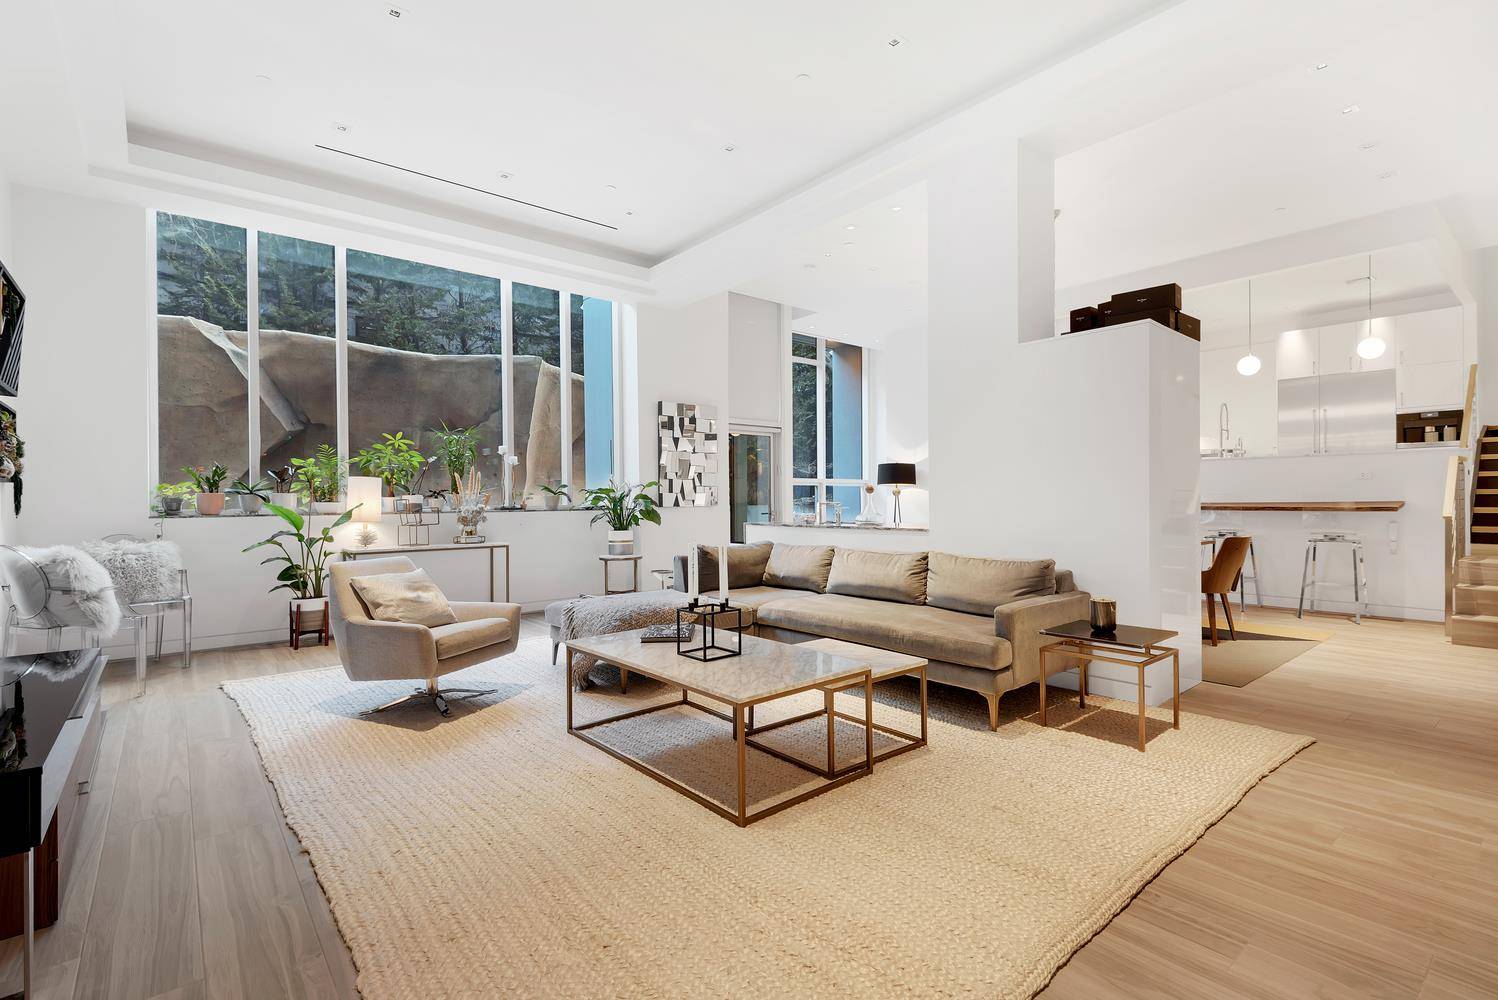 ALL SHOWINGS AND OPEN HOUSES ARE BY APPOINTMENT ONLY An incredible duplex that's also a contemporary work of art exists at 277 1st Street, Park Slope's premier boutique development comprised ...